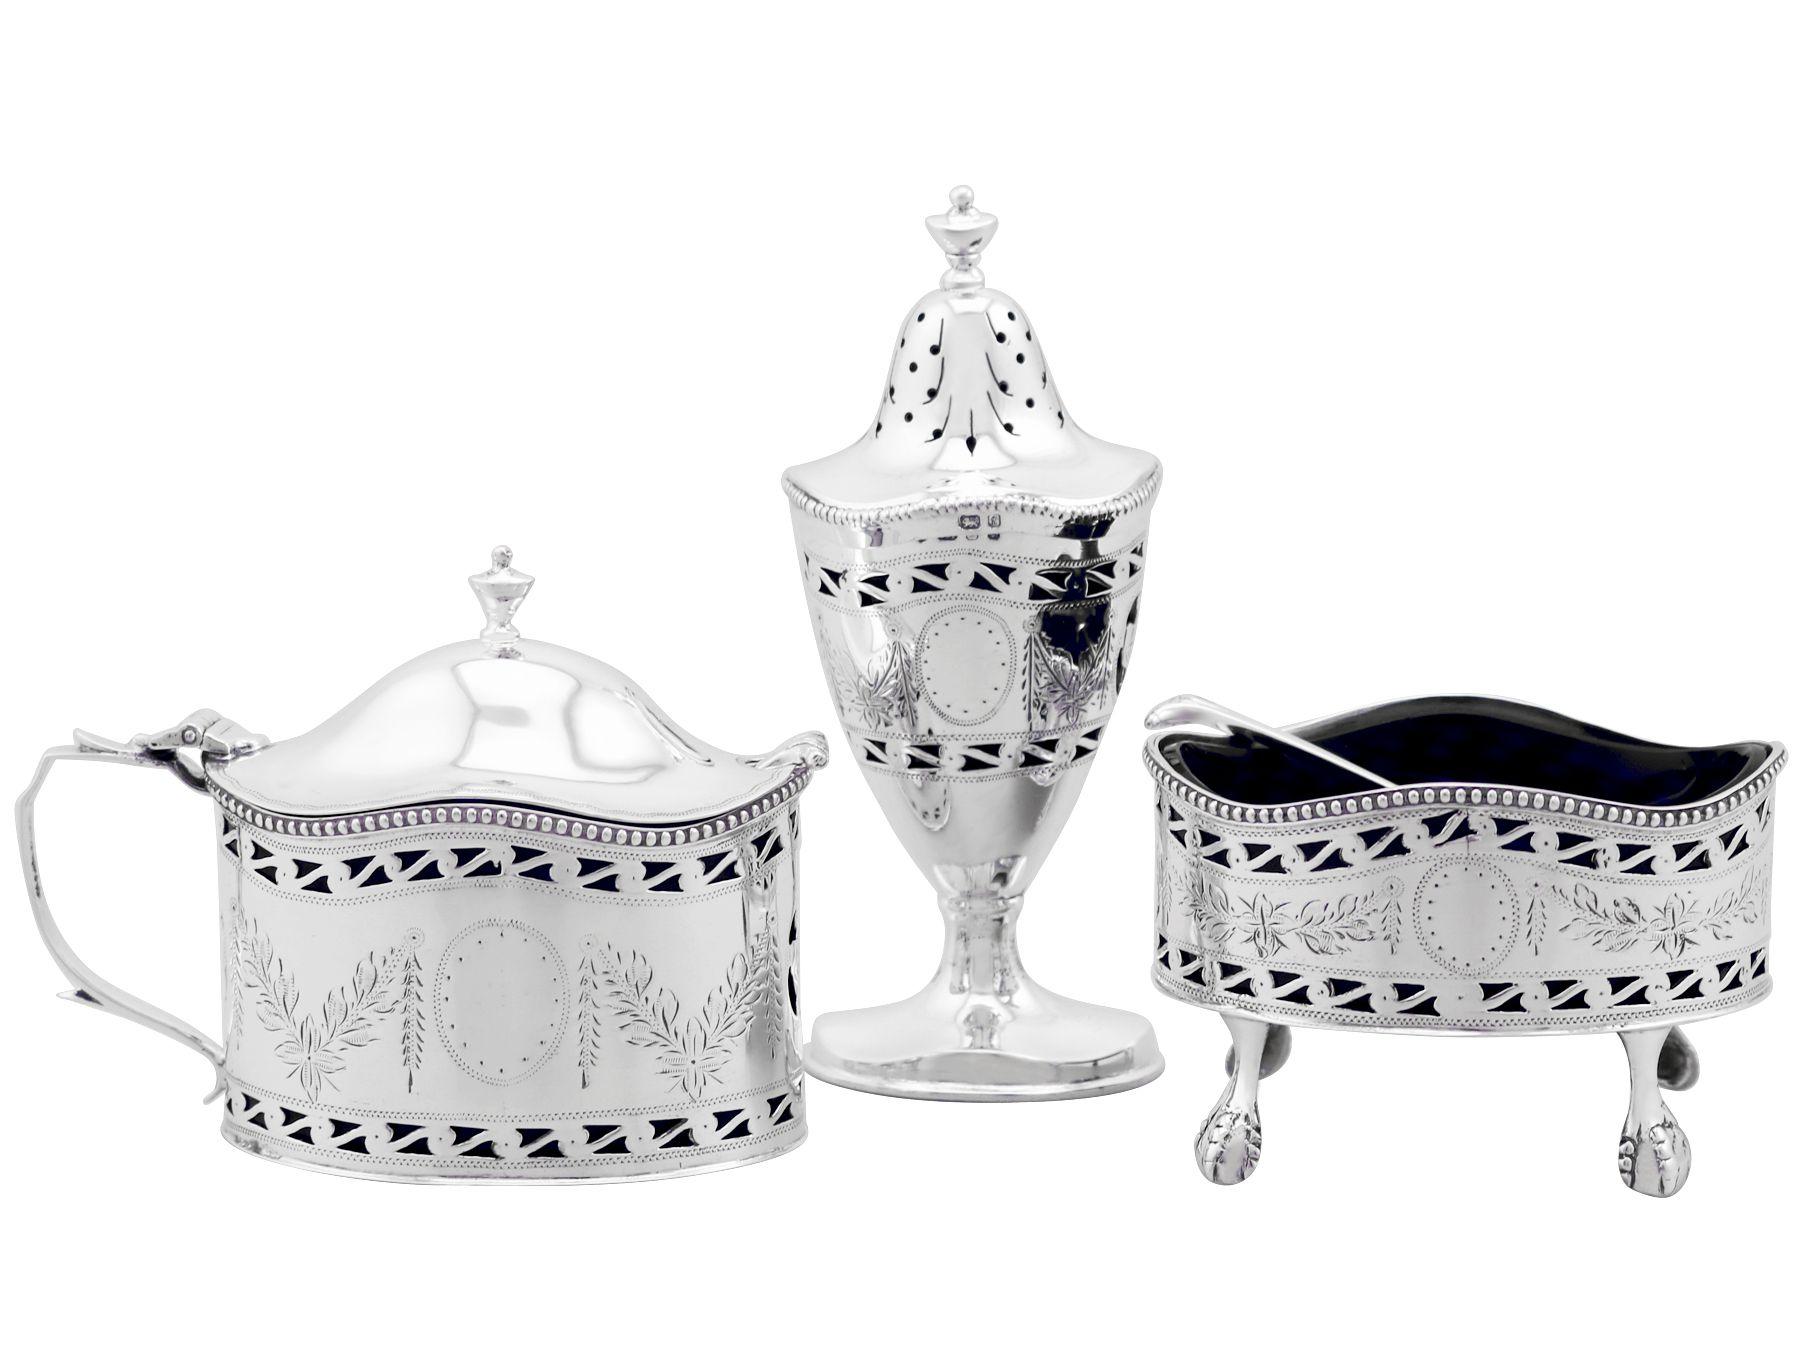 An exceptional, fine and impressive vintage Elizabeth II English sterling silver three piece condiment set - boxed; an addition to our dining silverware collection.

This exceptional vintage Elizabeth sterling silver three piece condiment set